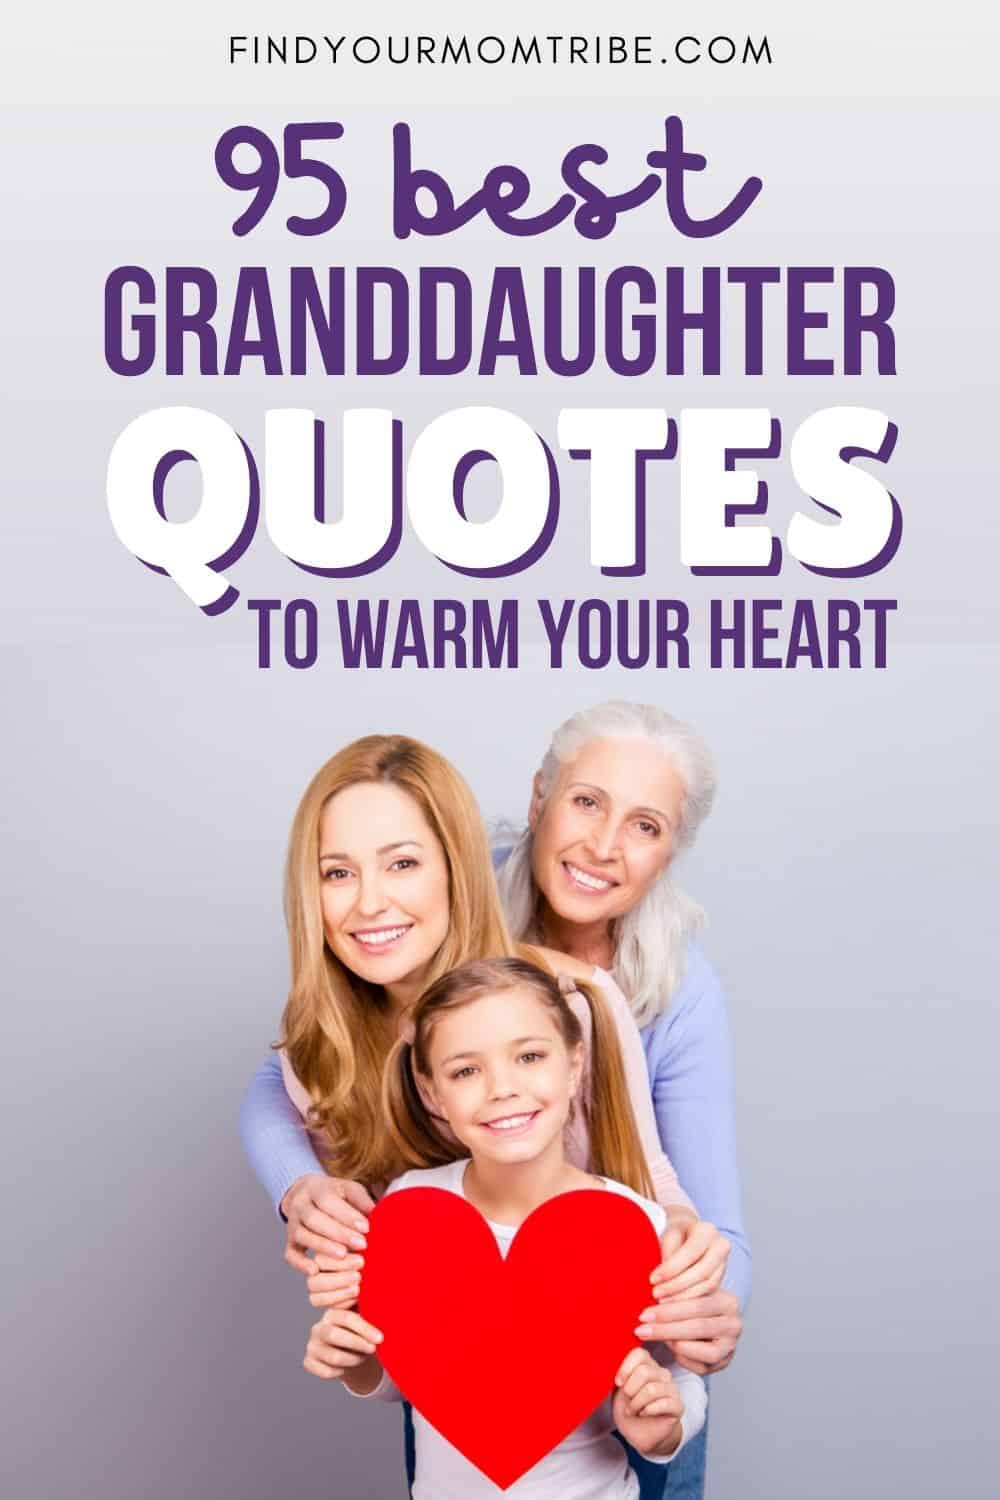 95 Best Granddaughter Quotes That Will Warm Your Heart pinterest